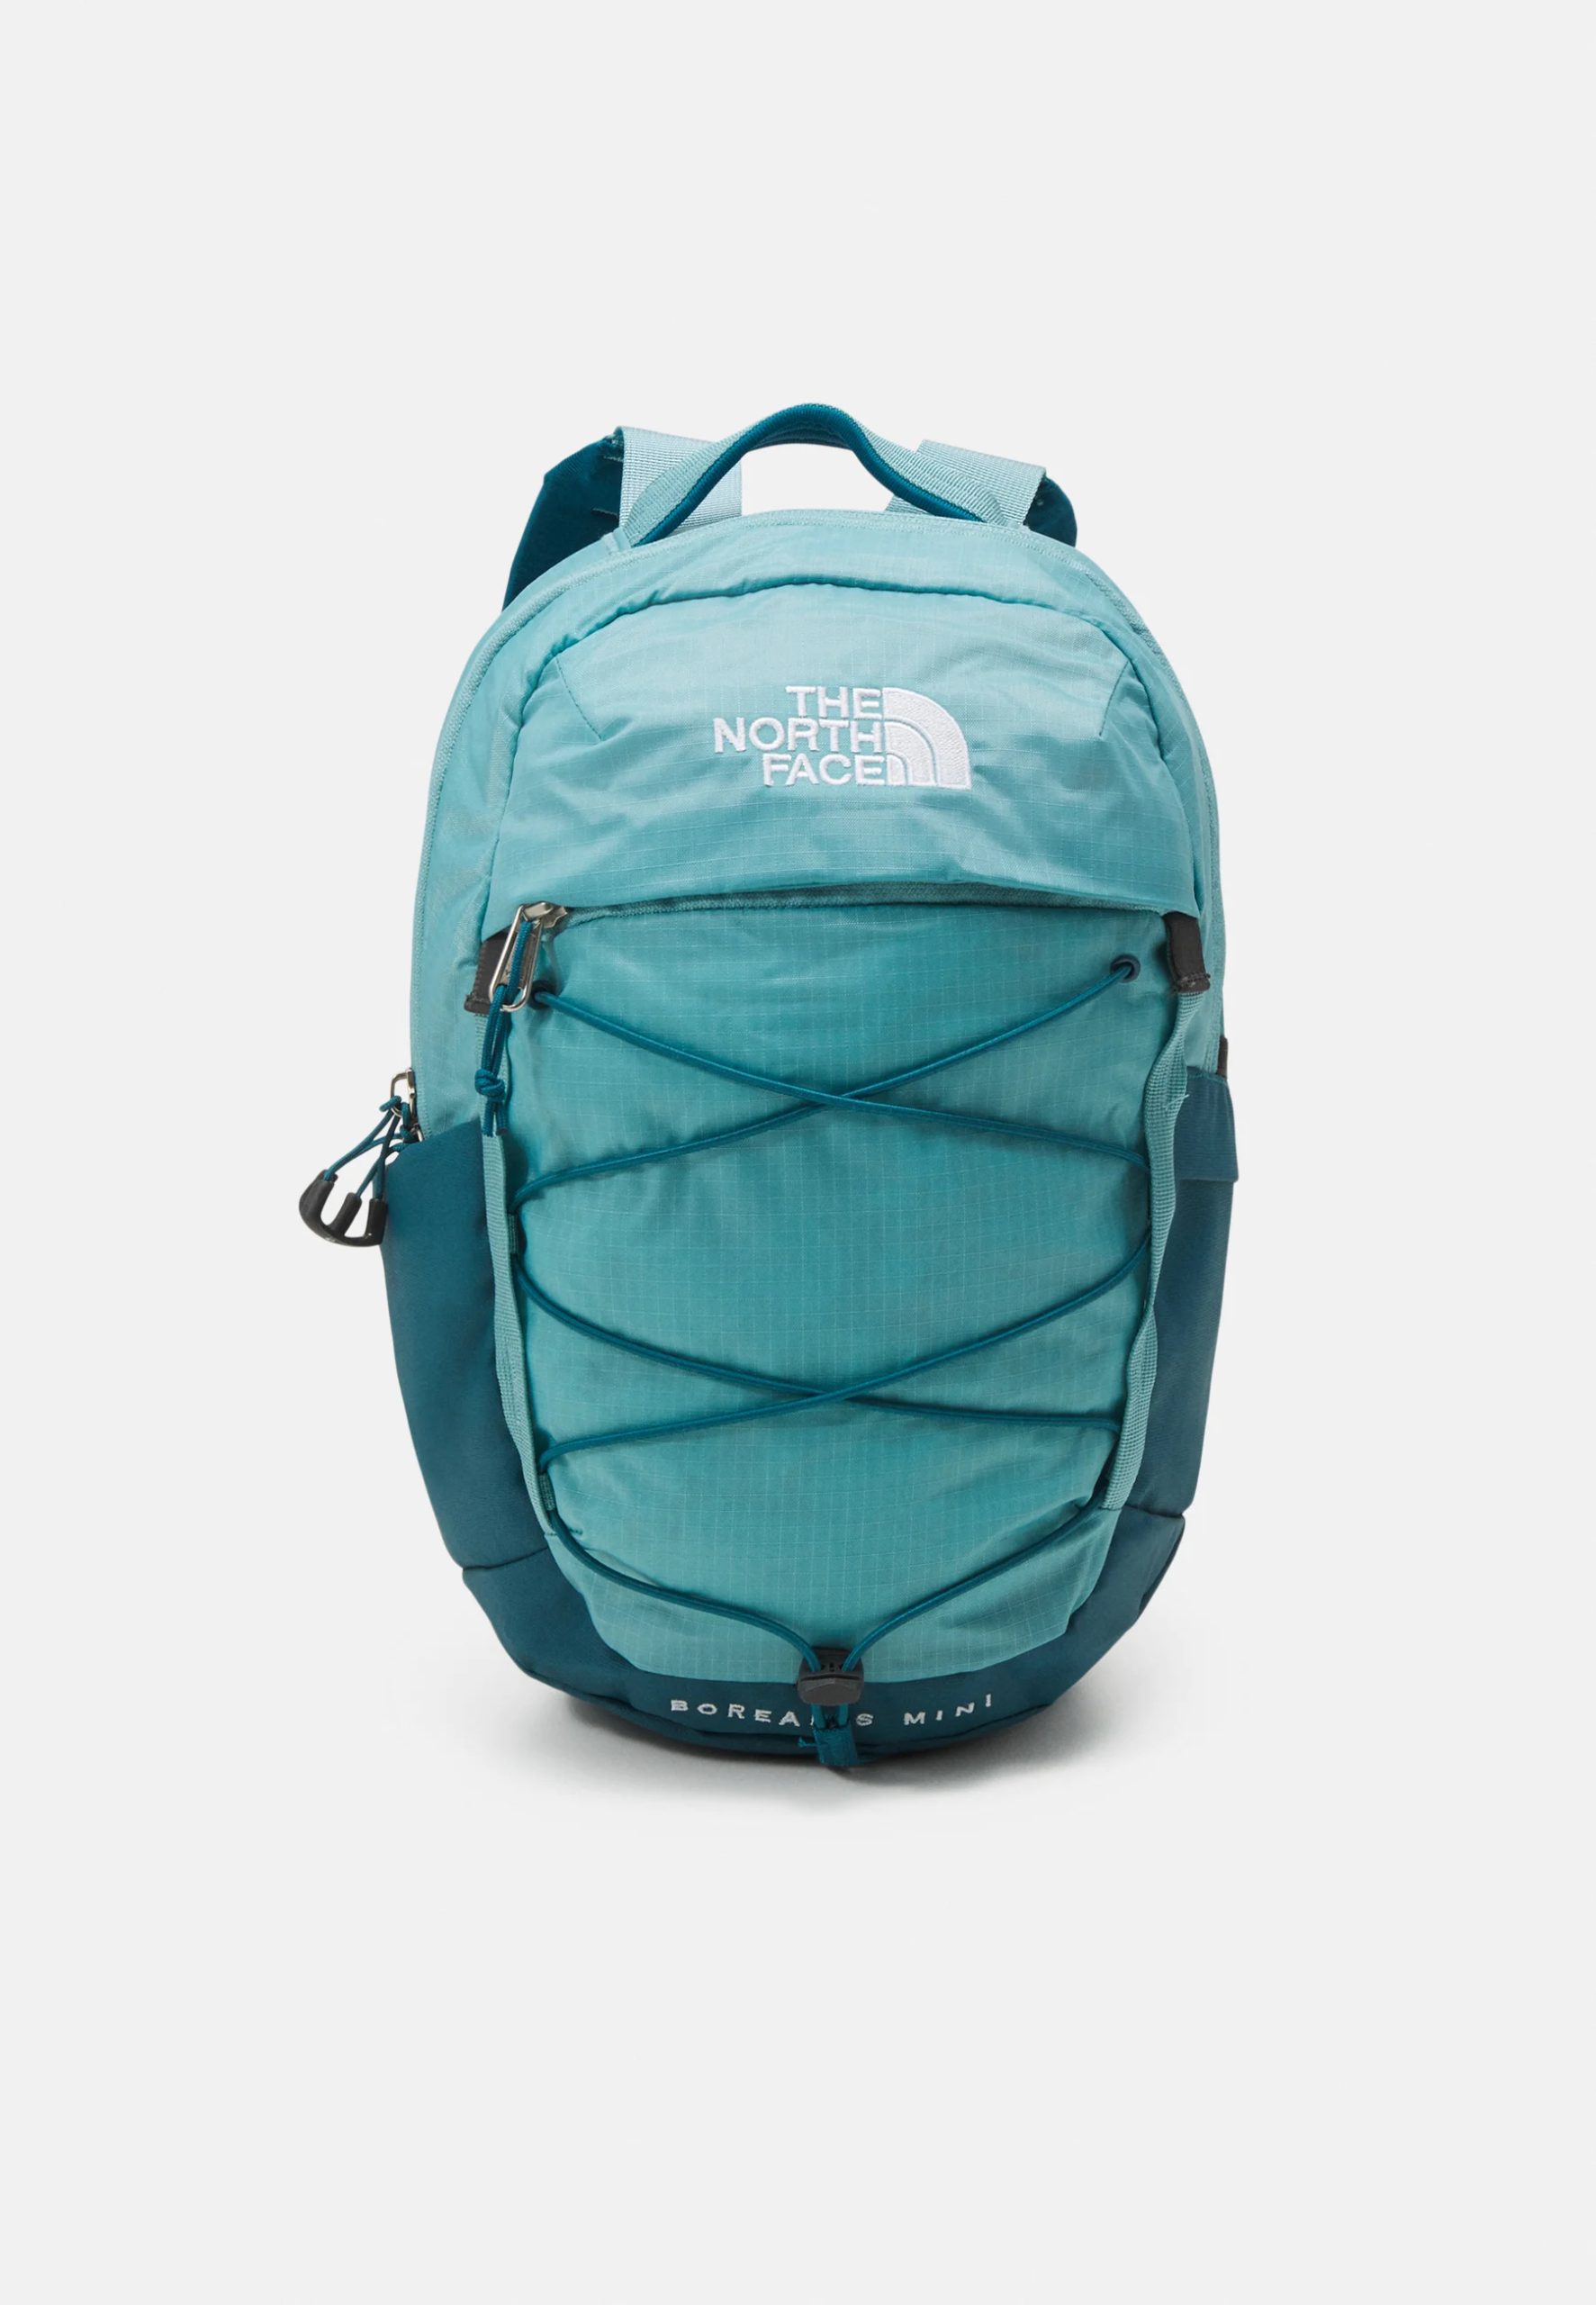 North face unisex borealis backpack: An Icon of Adventure缩略图